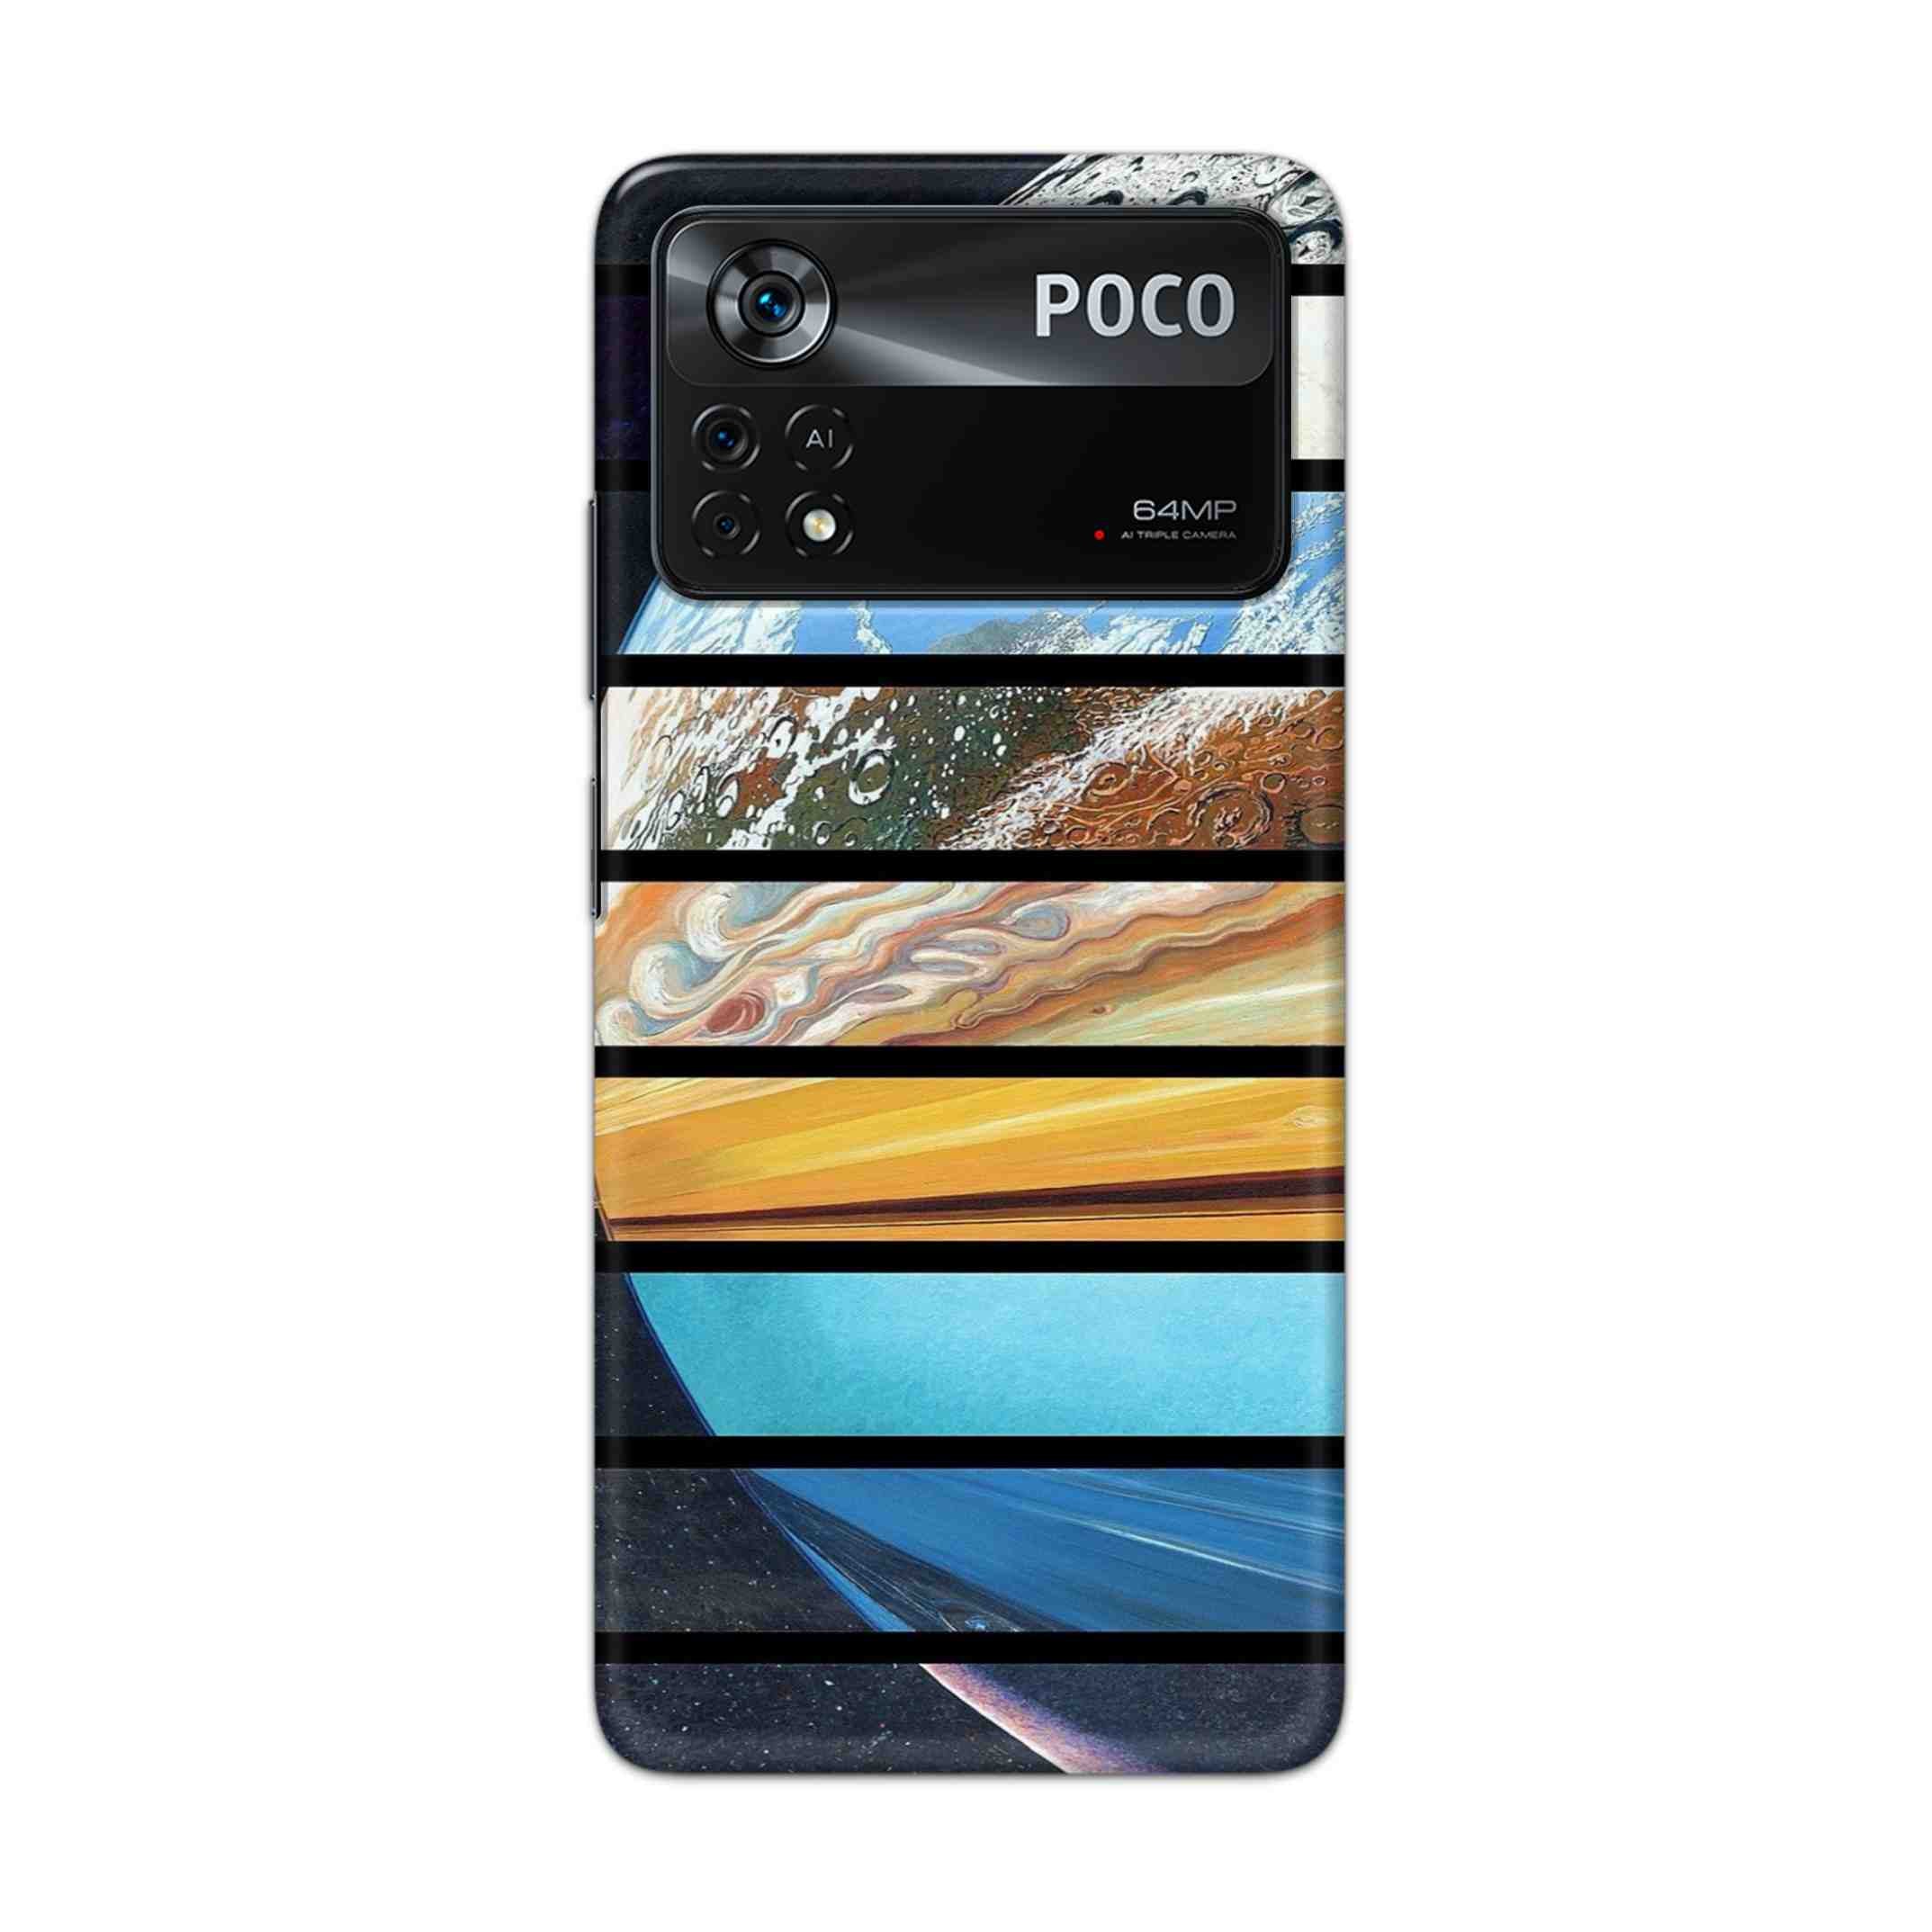 Buy Colourful Earth Hard Back Mobile Phone Case Cover For Poco X4 Pro 5G Online